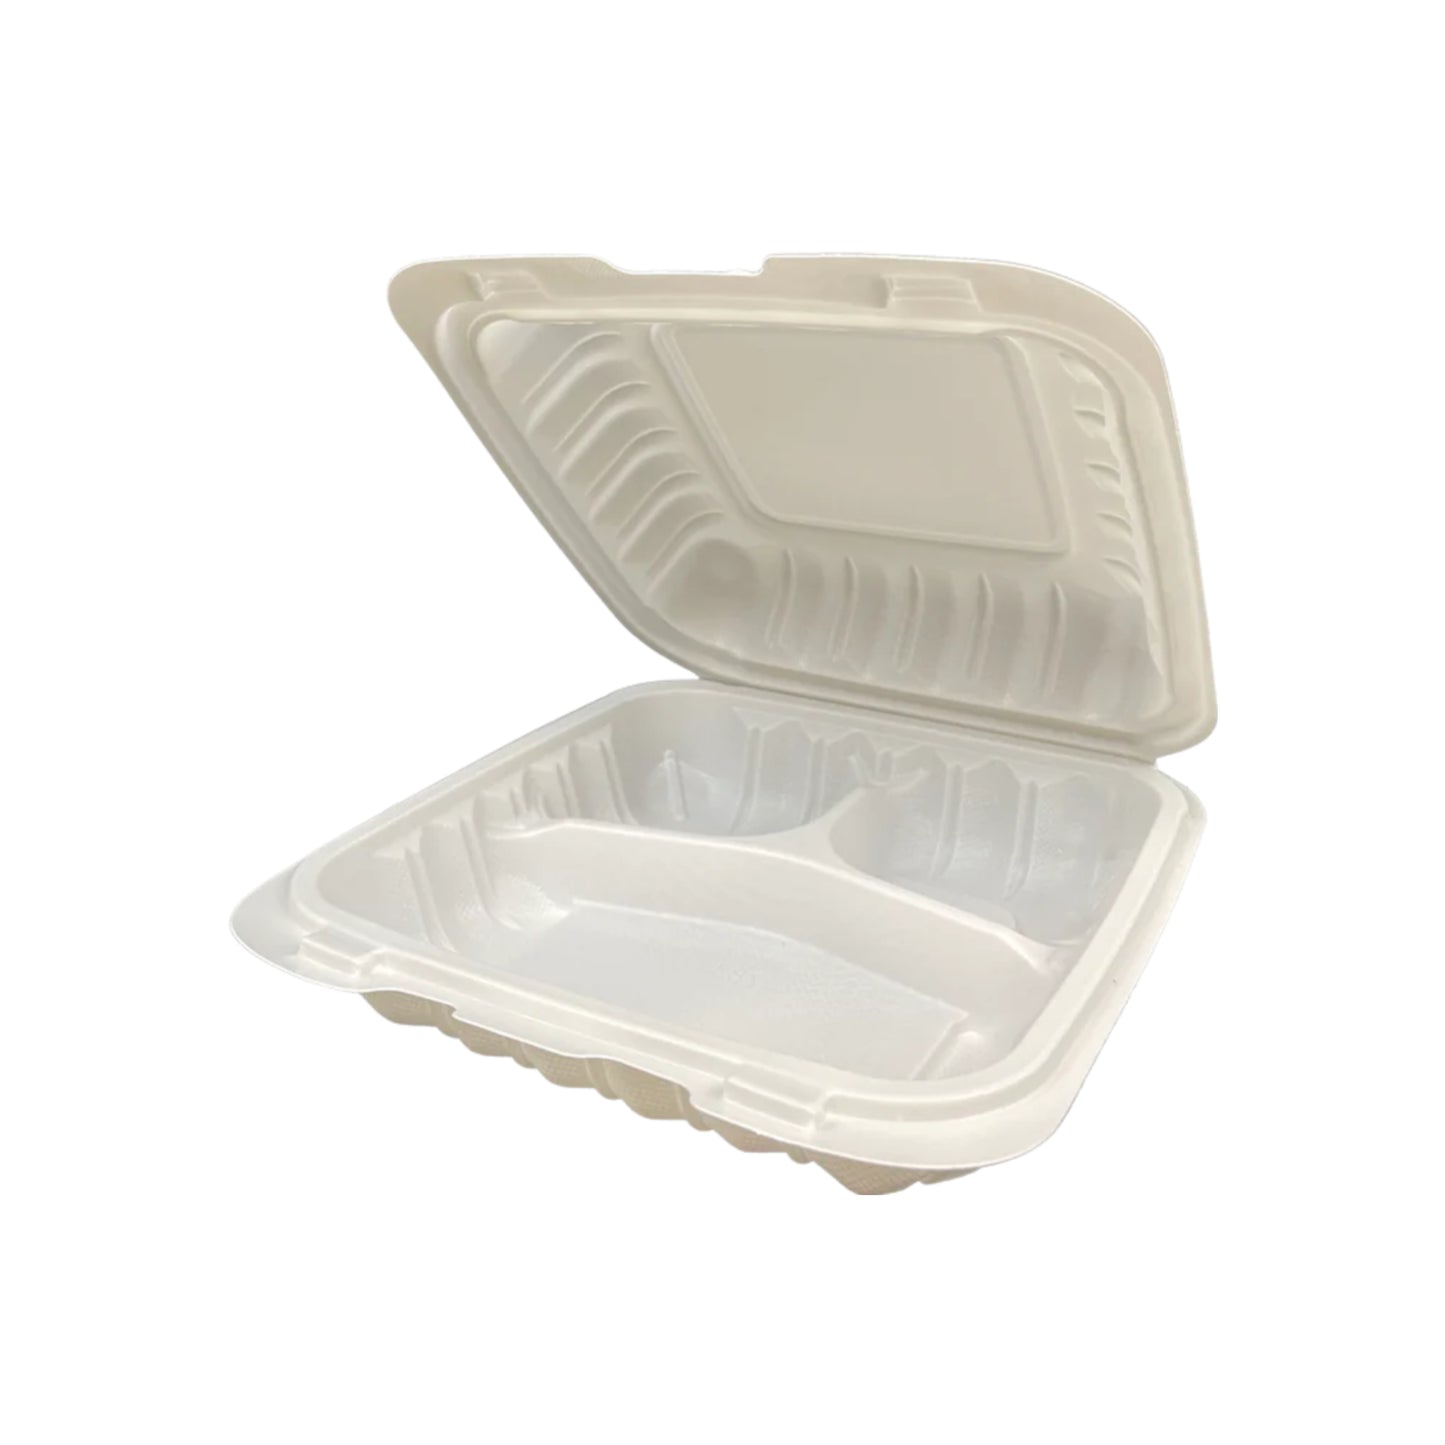 KIS-PP703G | 7.5x7.5x2.5 inches, 3-Compartment, PP Clamshell Food Container; $0.219/pc